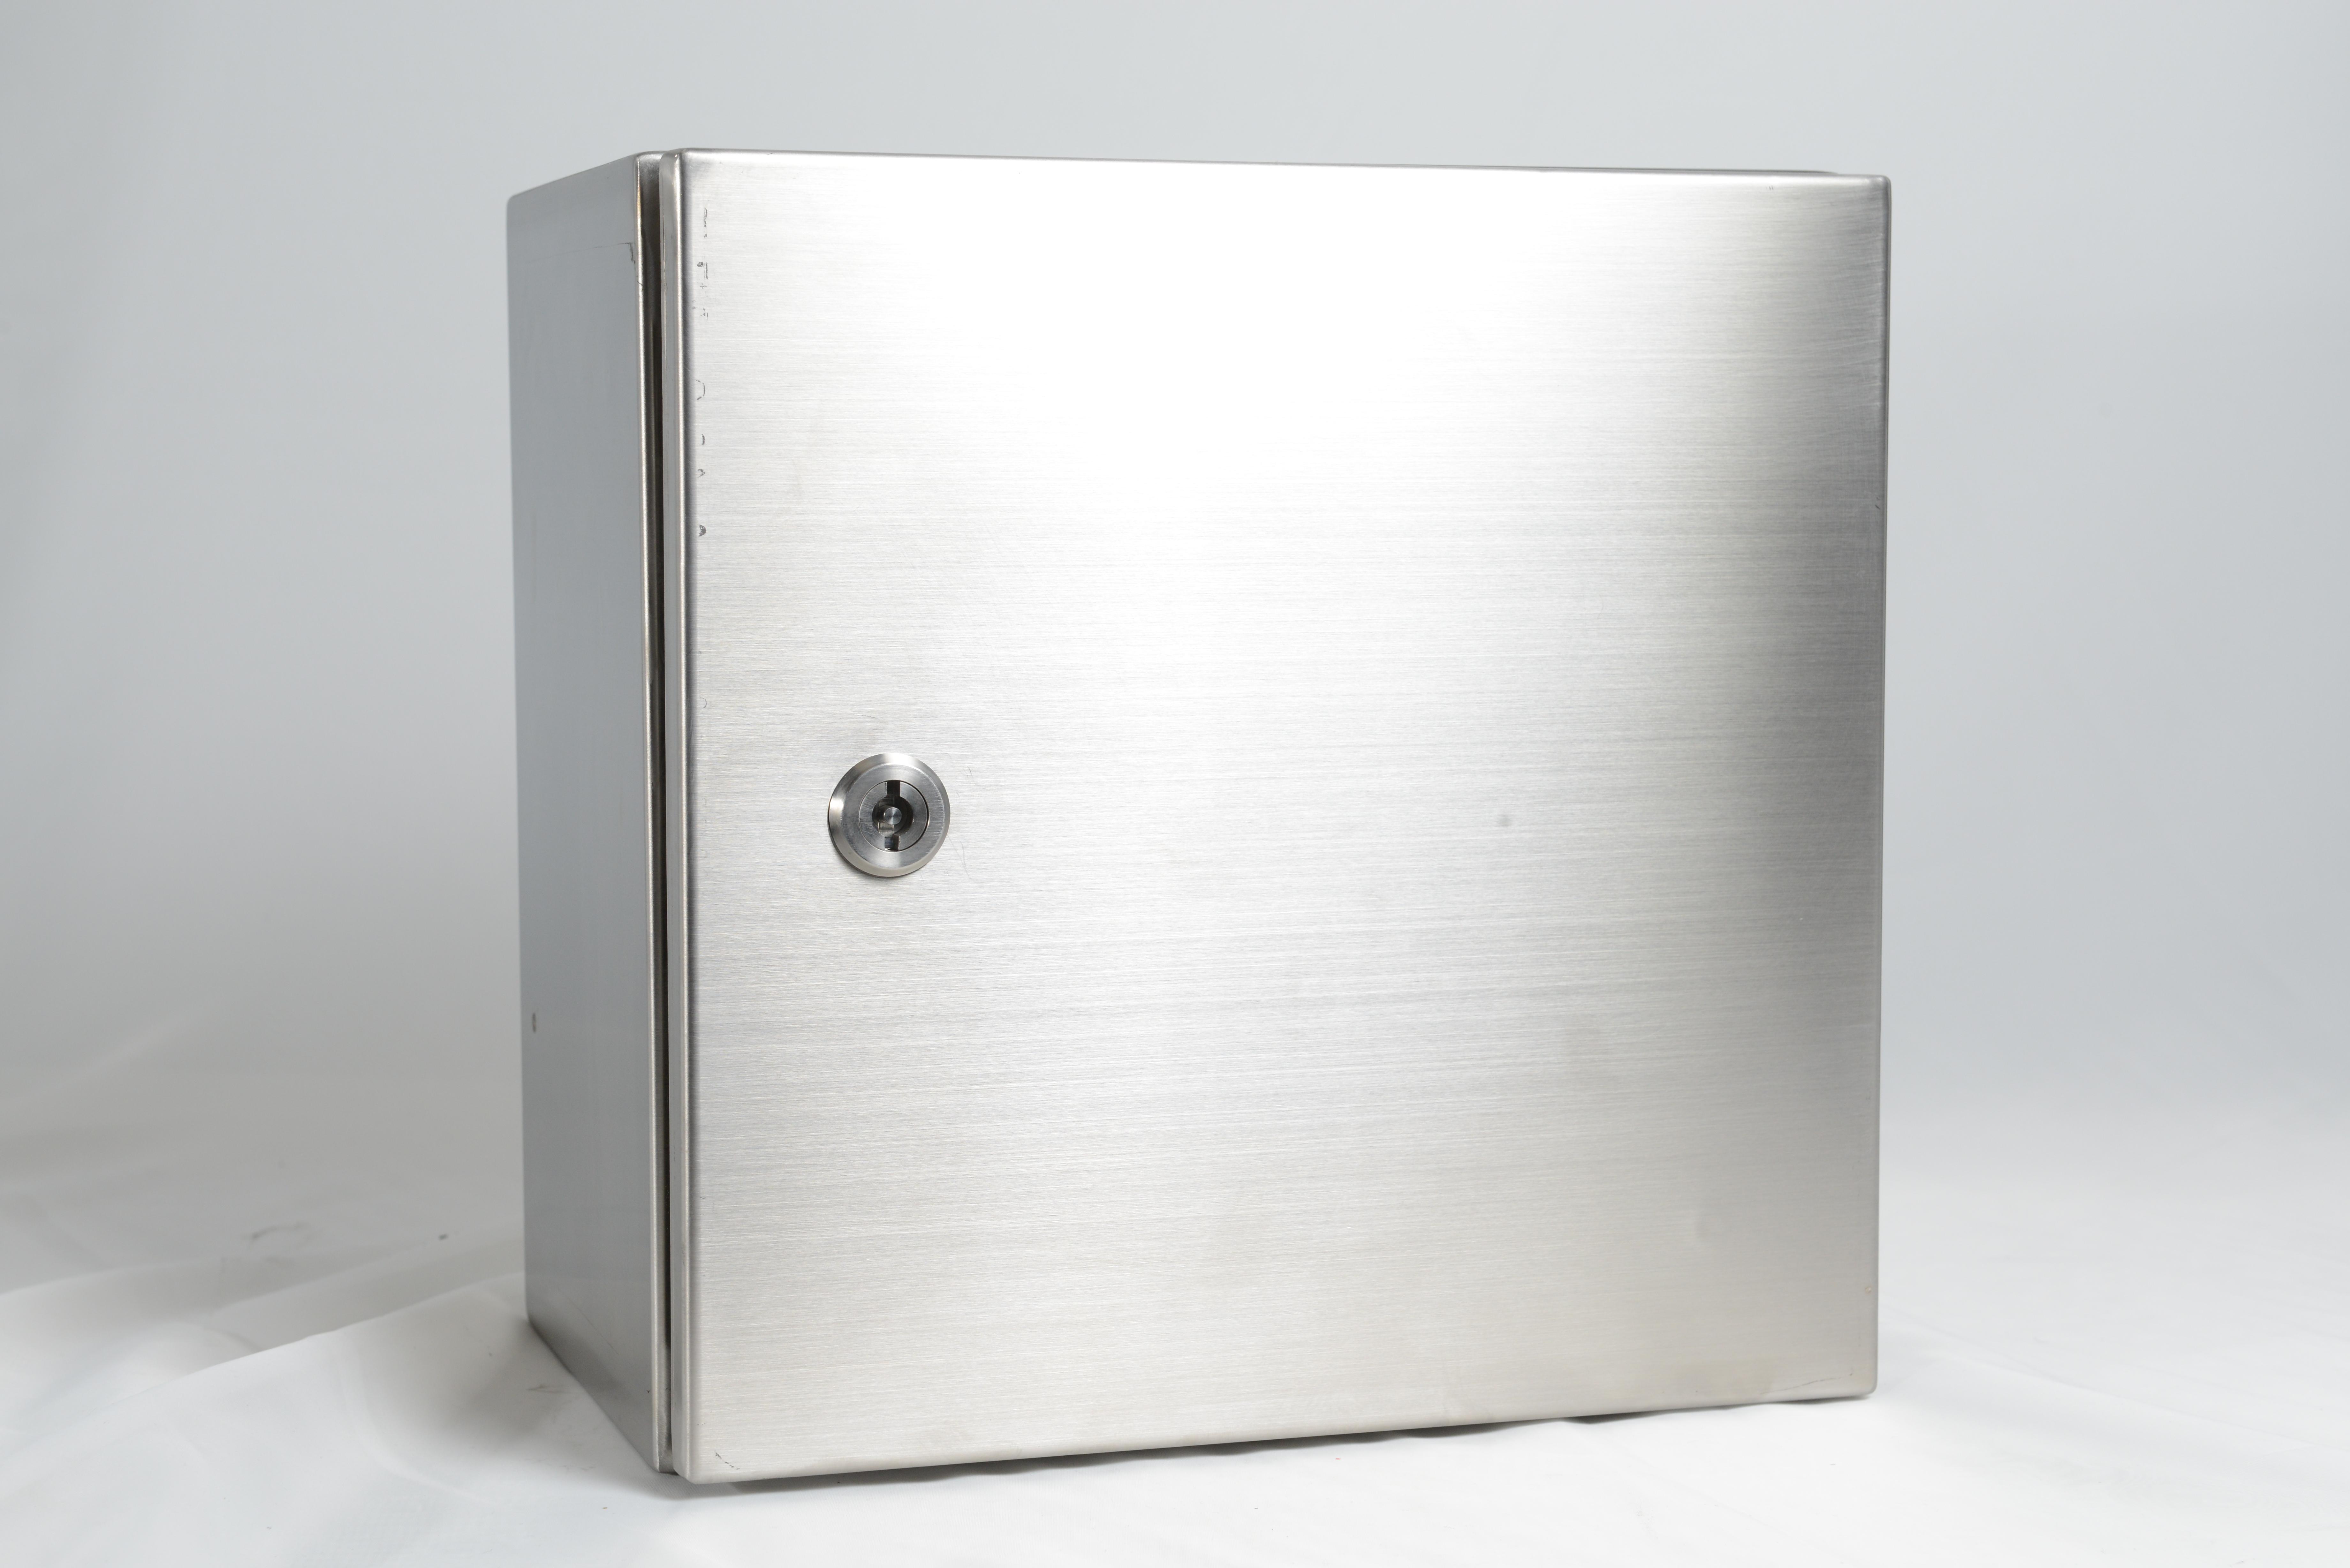 RCG stainless steel enclosure 316 grade 600x400x300mm - wall mounting